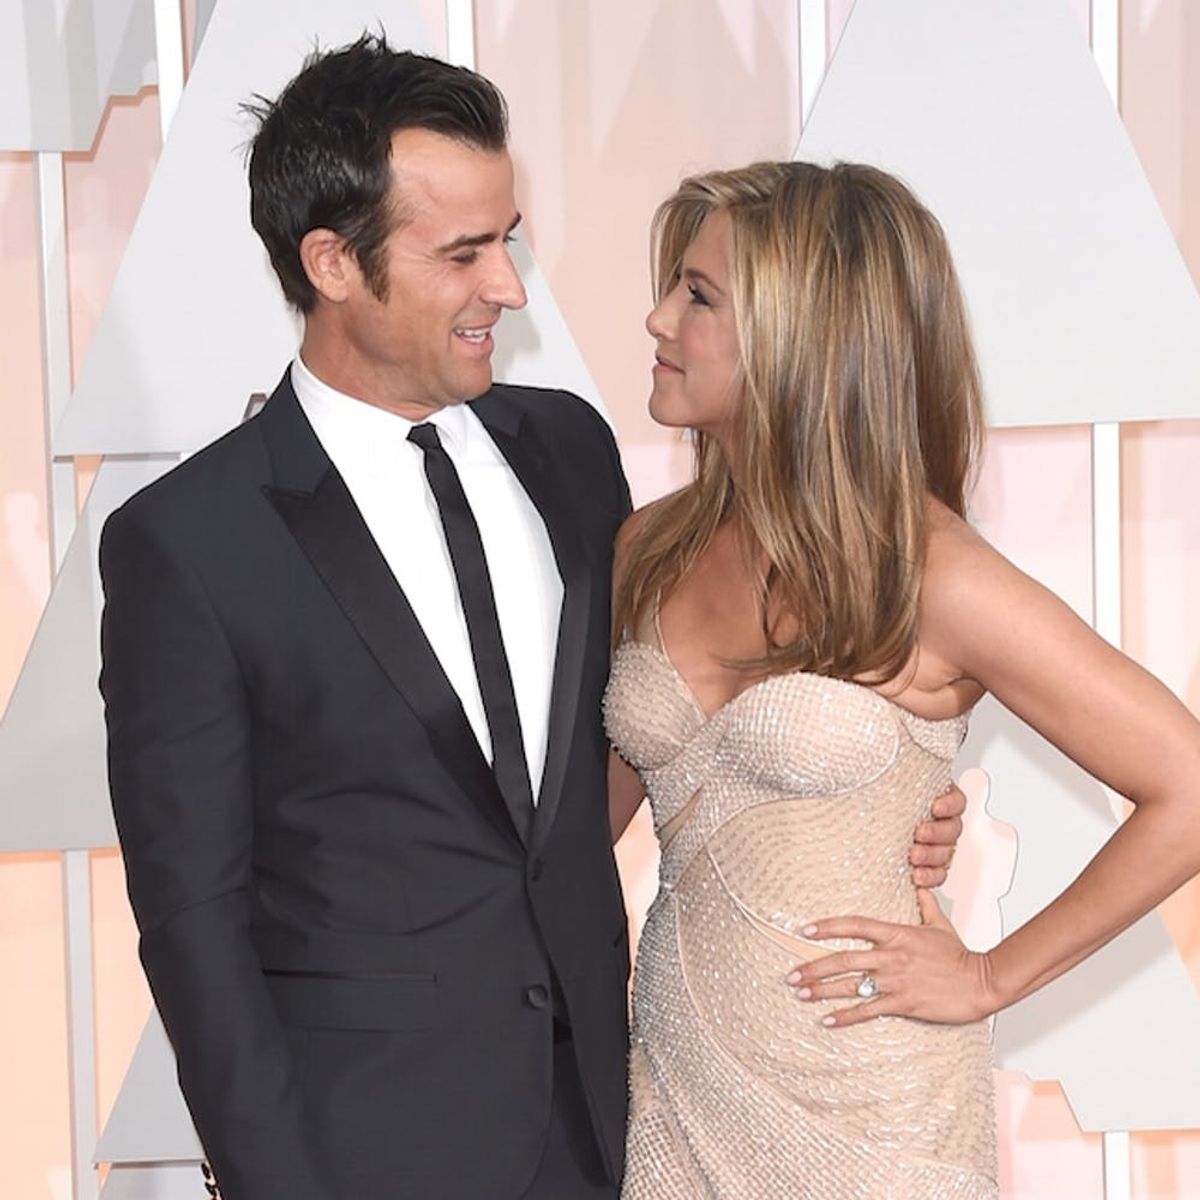 Jennifer Aniston + Justin Theroux Are the Latest Celebs to Get Married like This